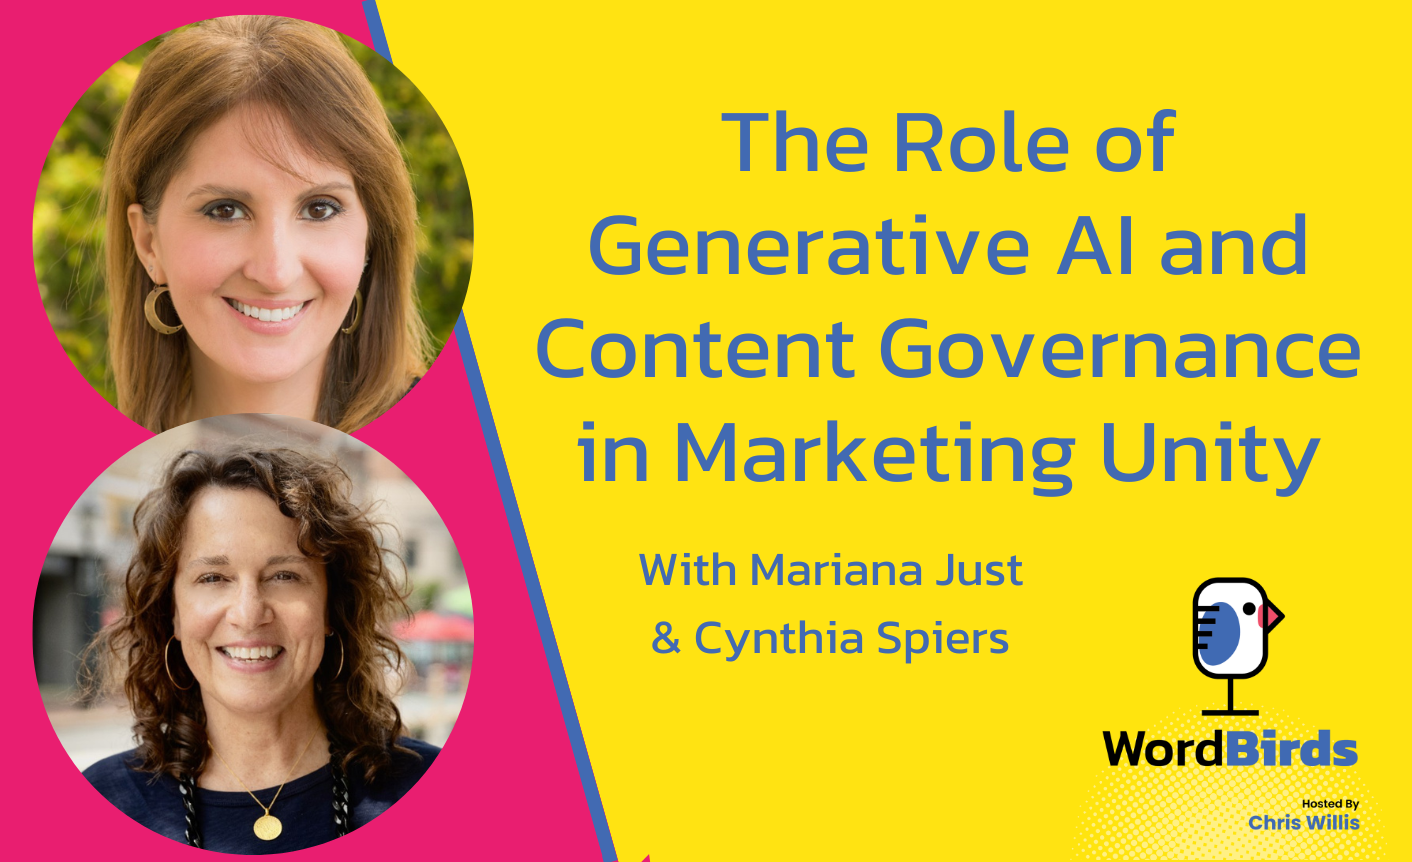 On the rights of the image, on a yellow background, the title "The Role of Generative AI and Content Governance in Marketing Unity" is written. On the left are two images. One at the top of Mariana Just and another on the bottom of Cynthia Spiers